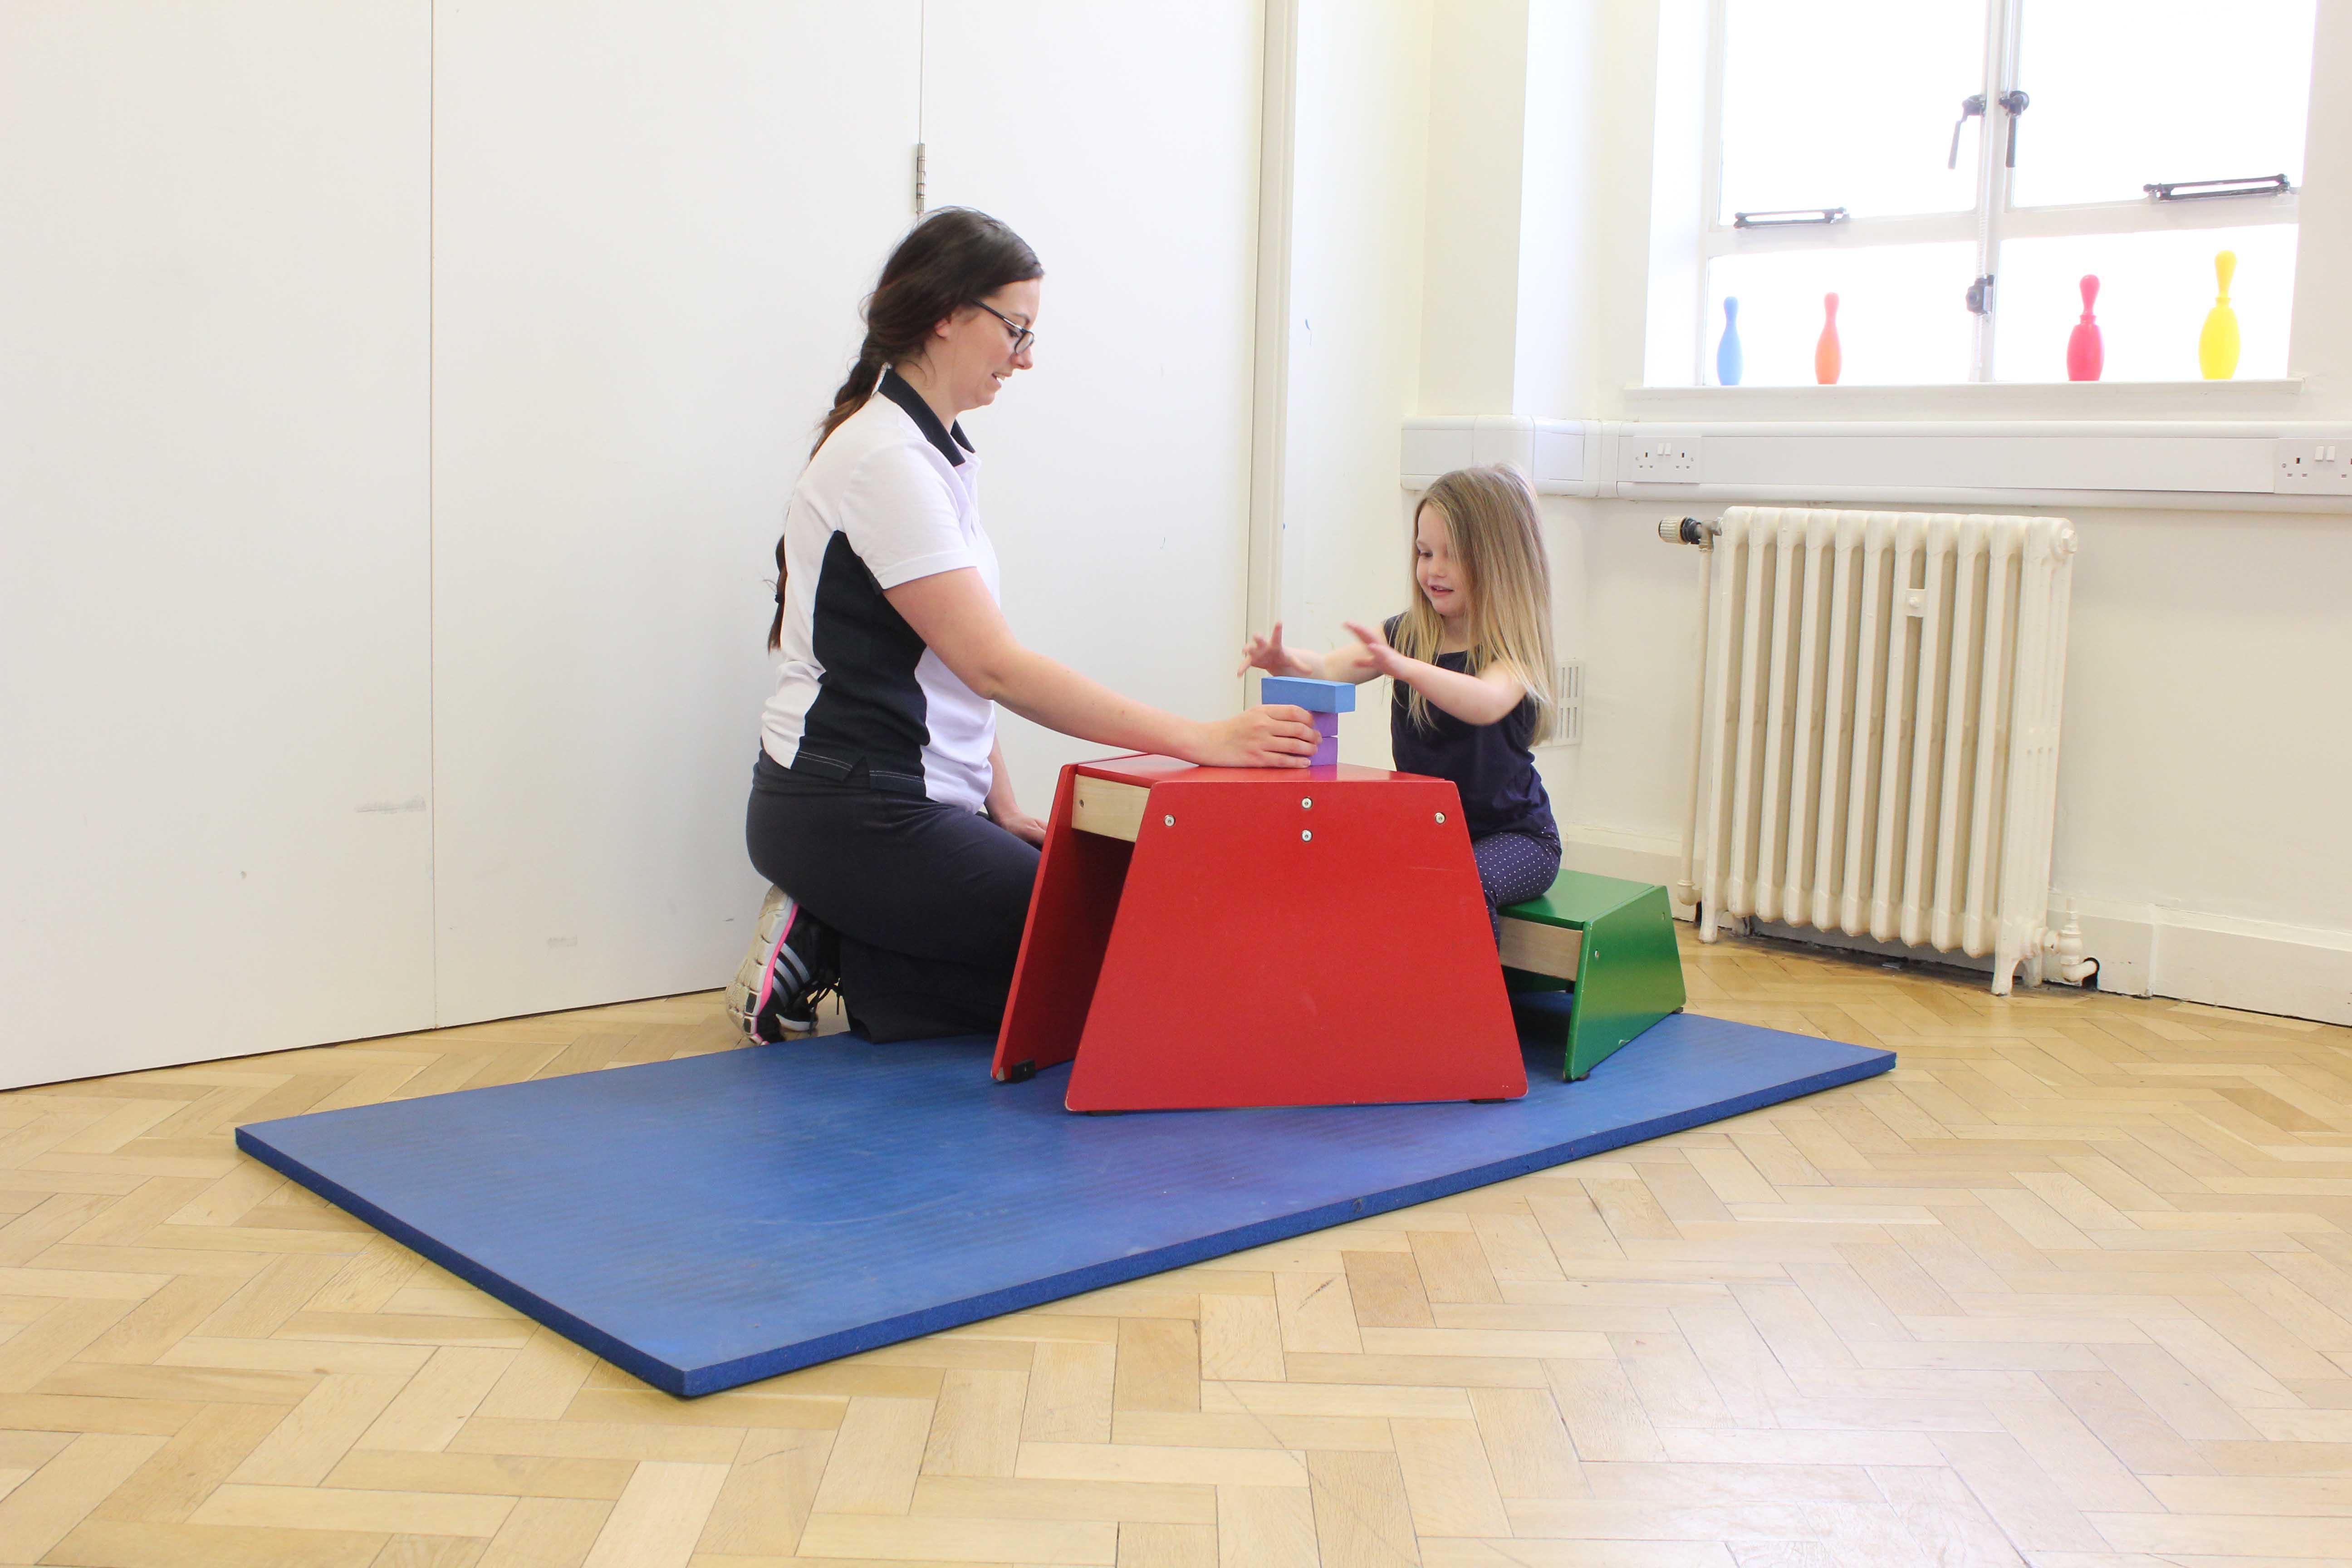 Physiotherapy reports can detail the childs current ability and make recommendations for future care.